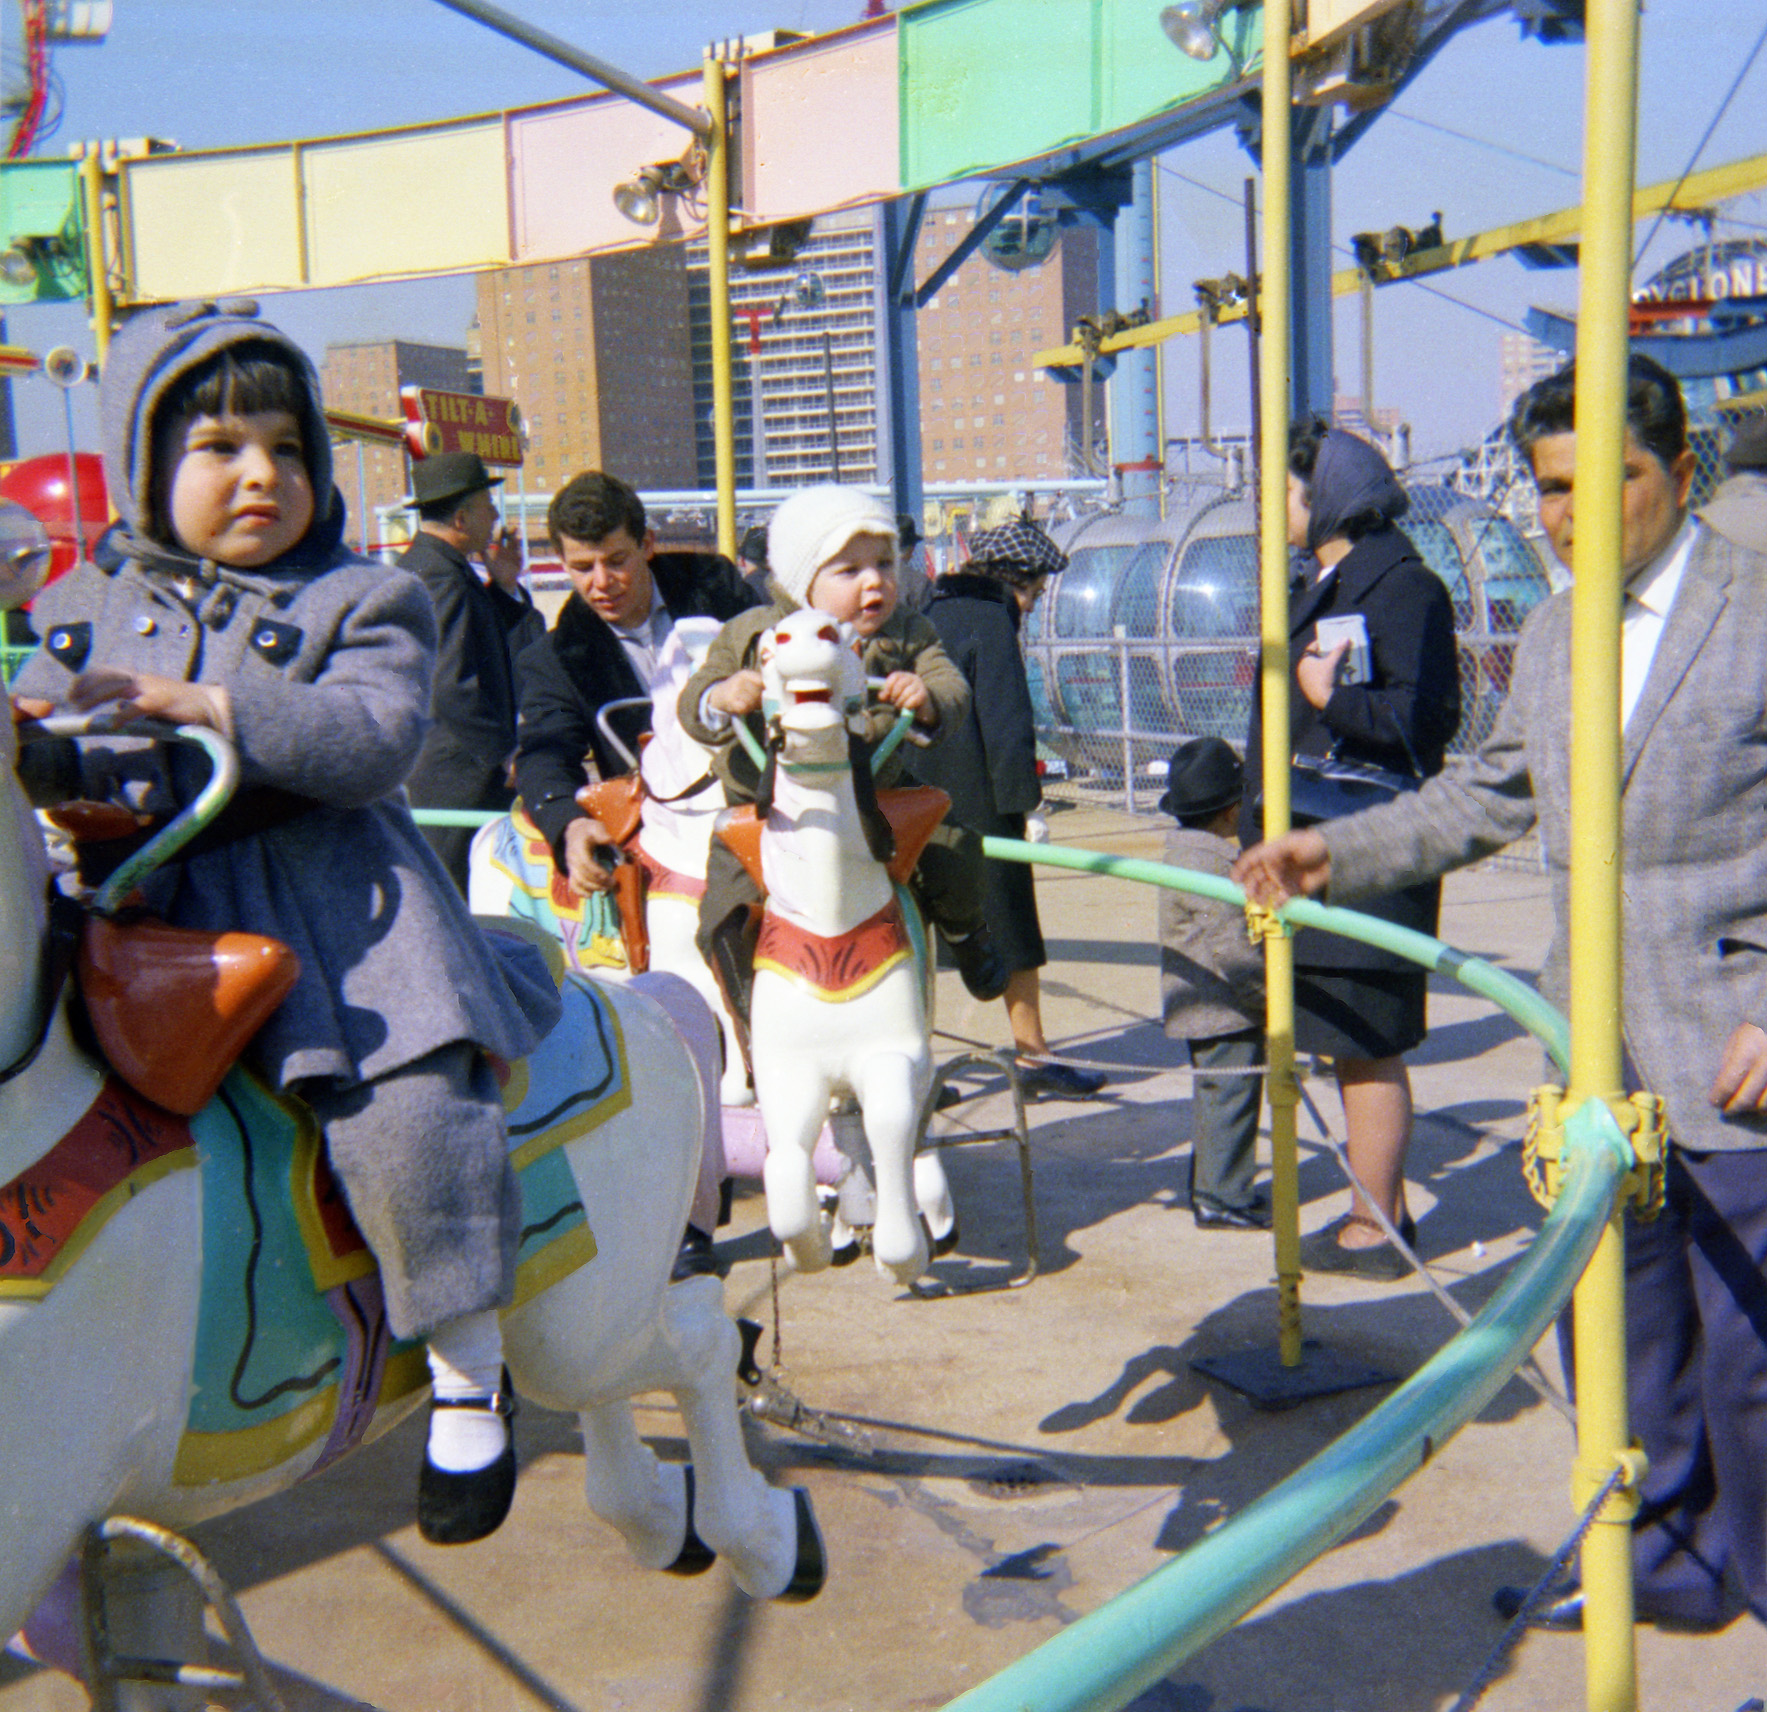 On the Merry-go-round at Coney Island, New York, in 1963. View full size.